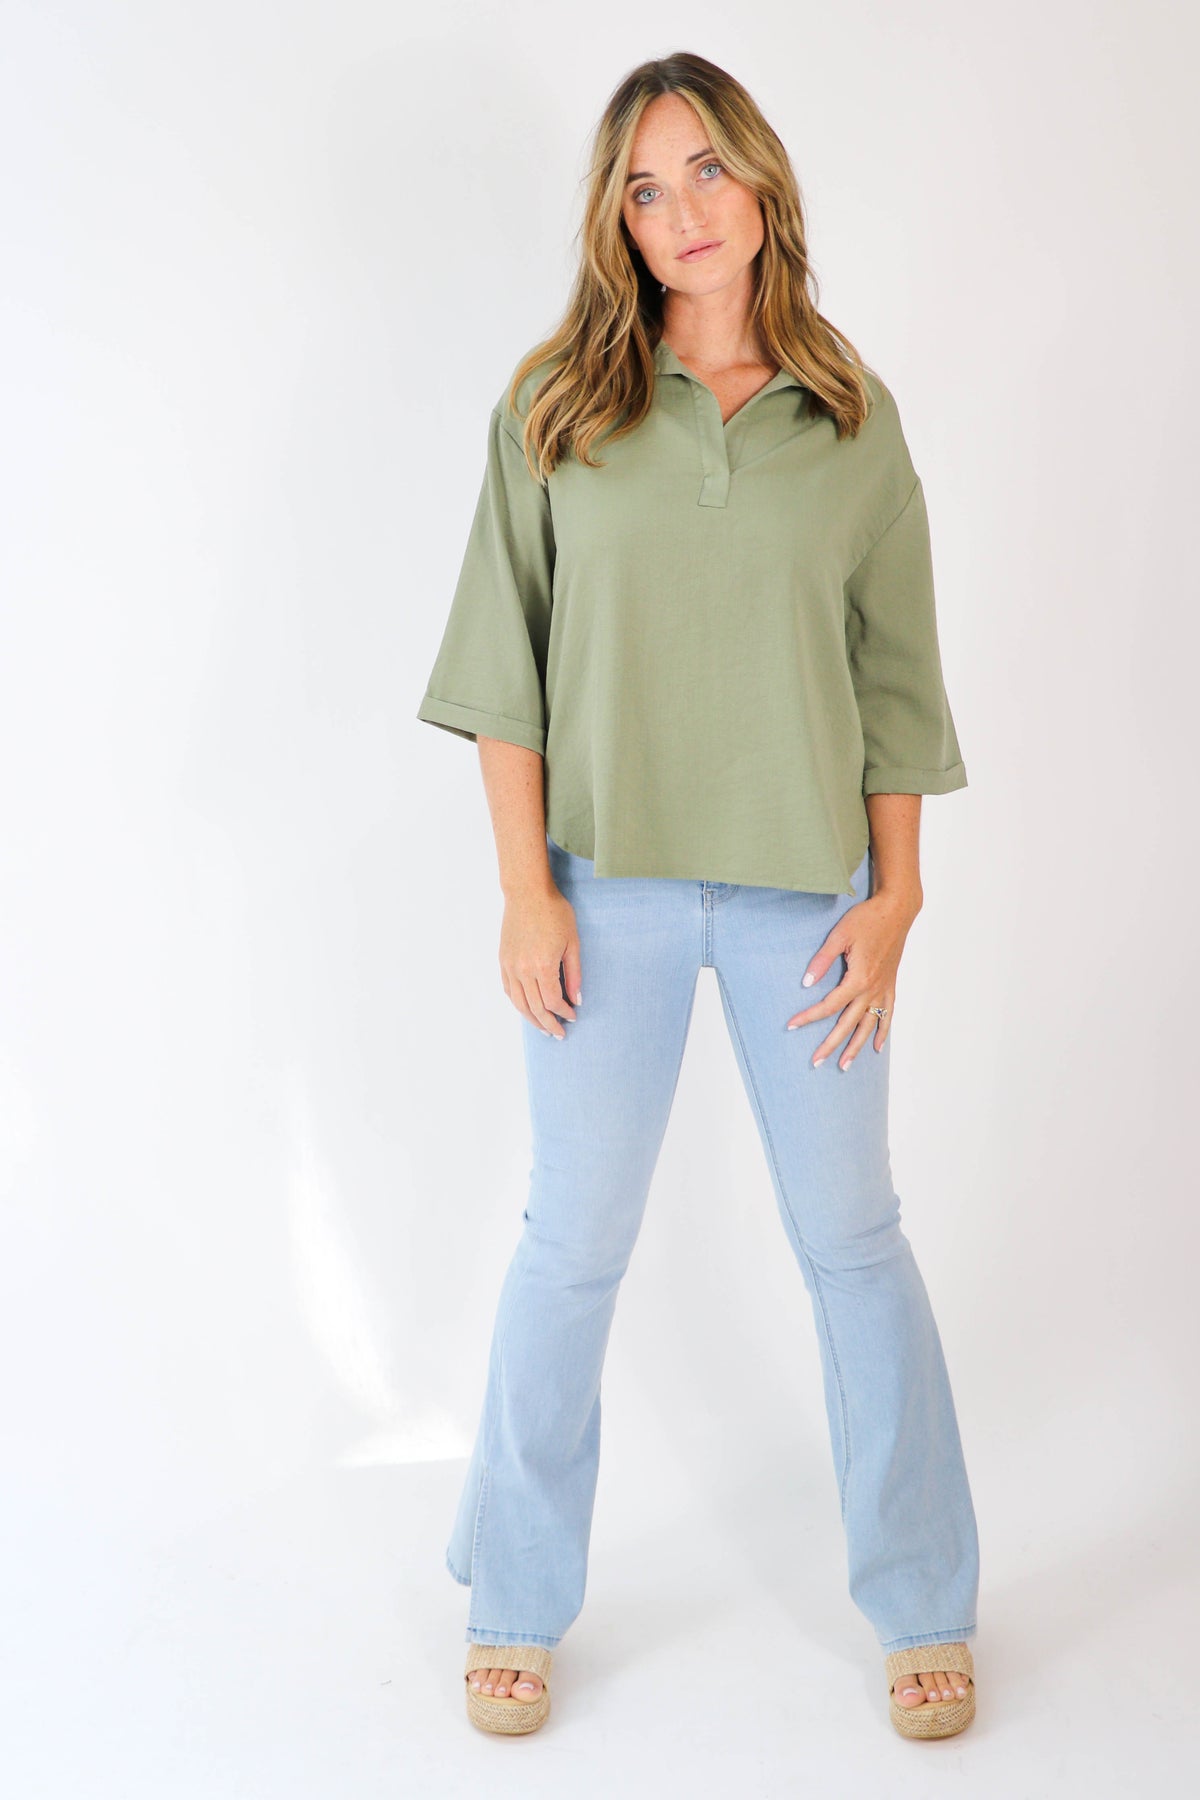 She + Sky | 3/4 Sleeve Olive Top for Women | Sweetest Stitch Boutique